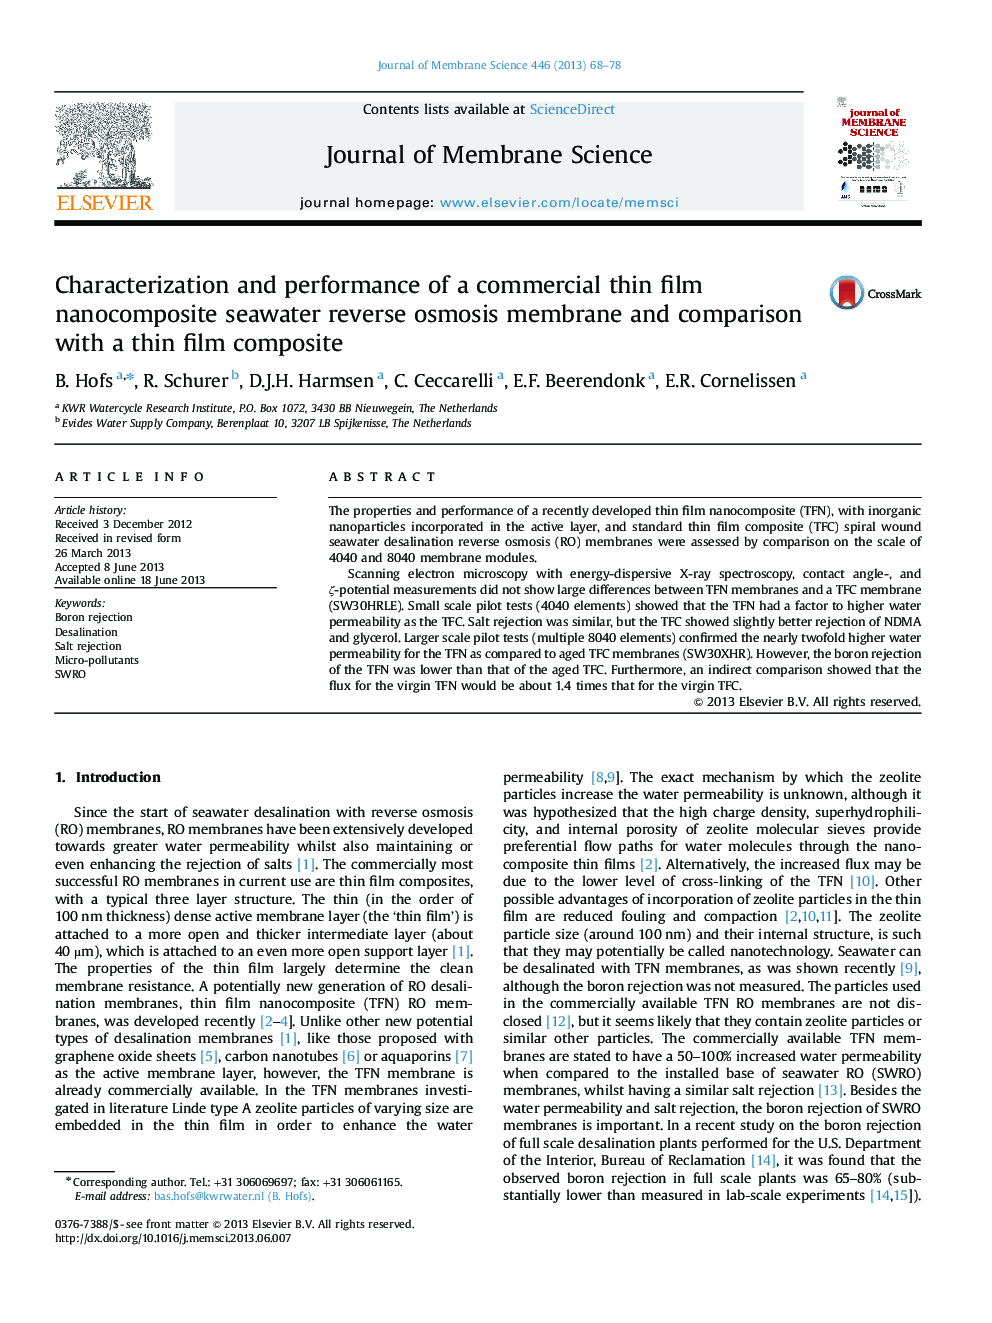 Characterization and performance of a commercial thin film nanocomposite seawater reverse osmosis membrane and comparison with a thin film composite